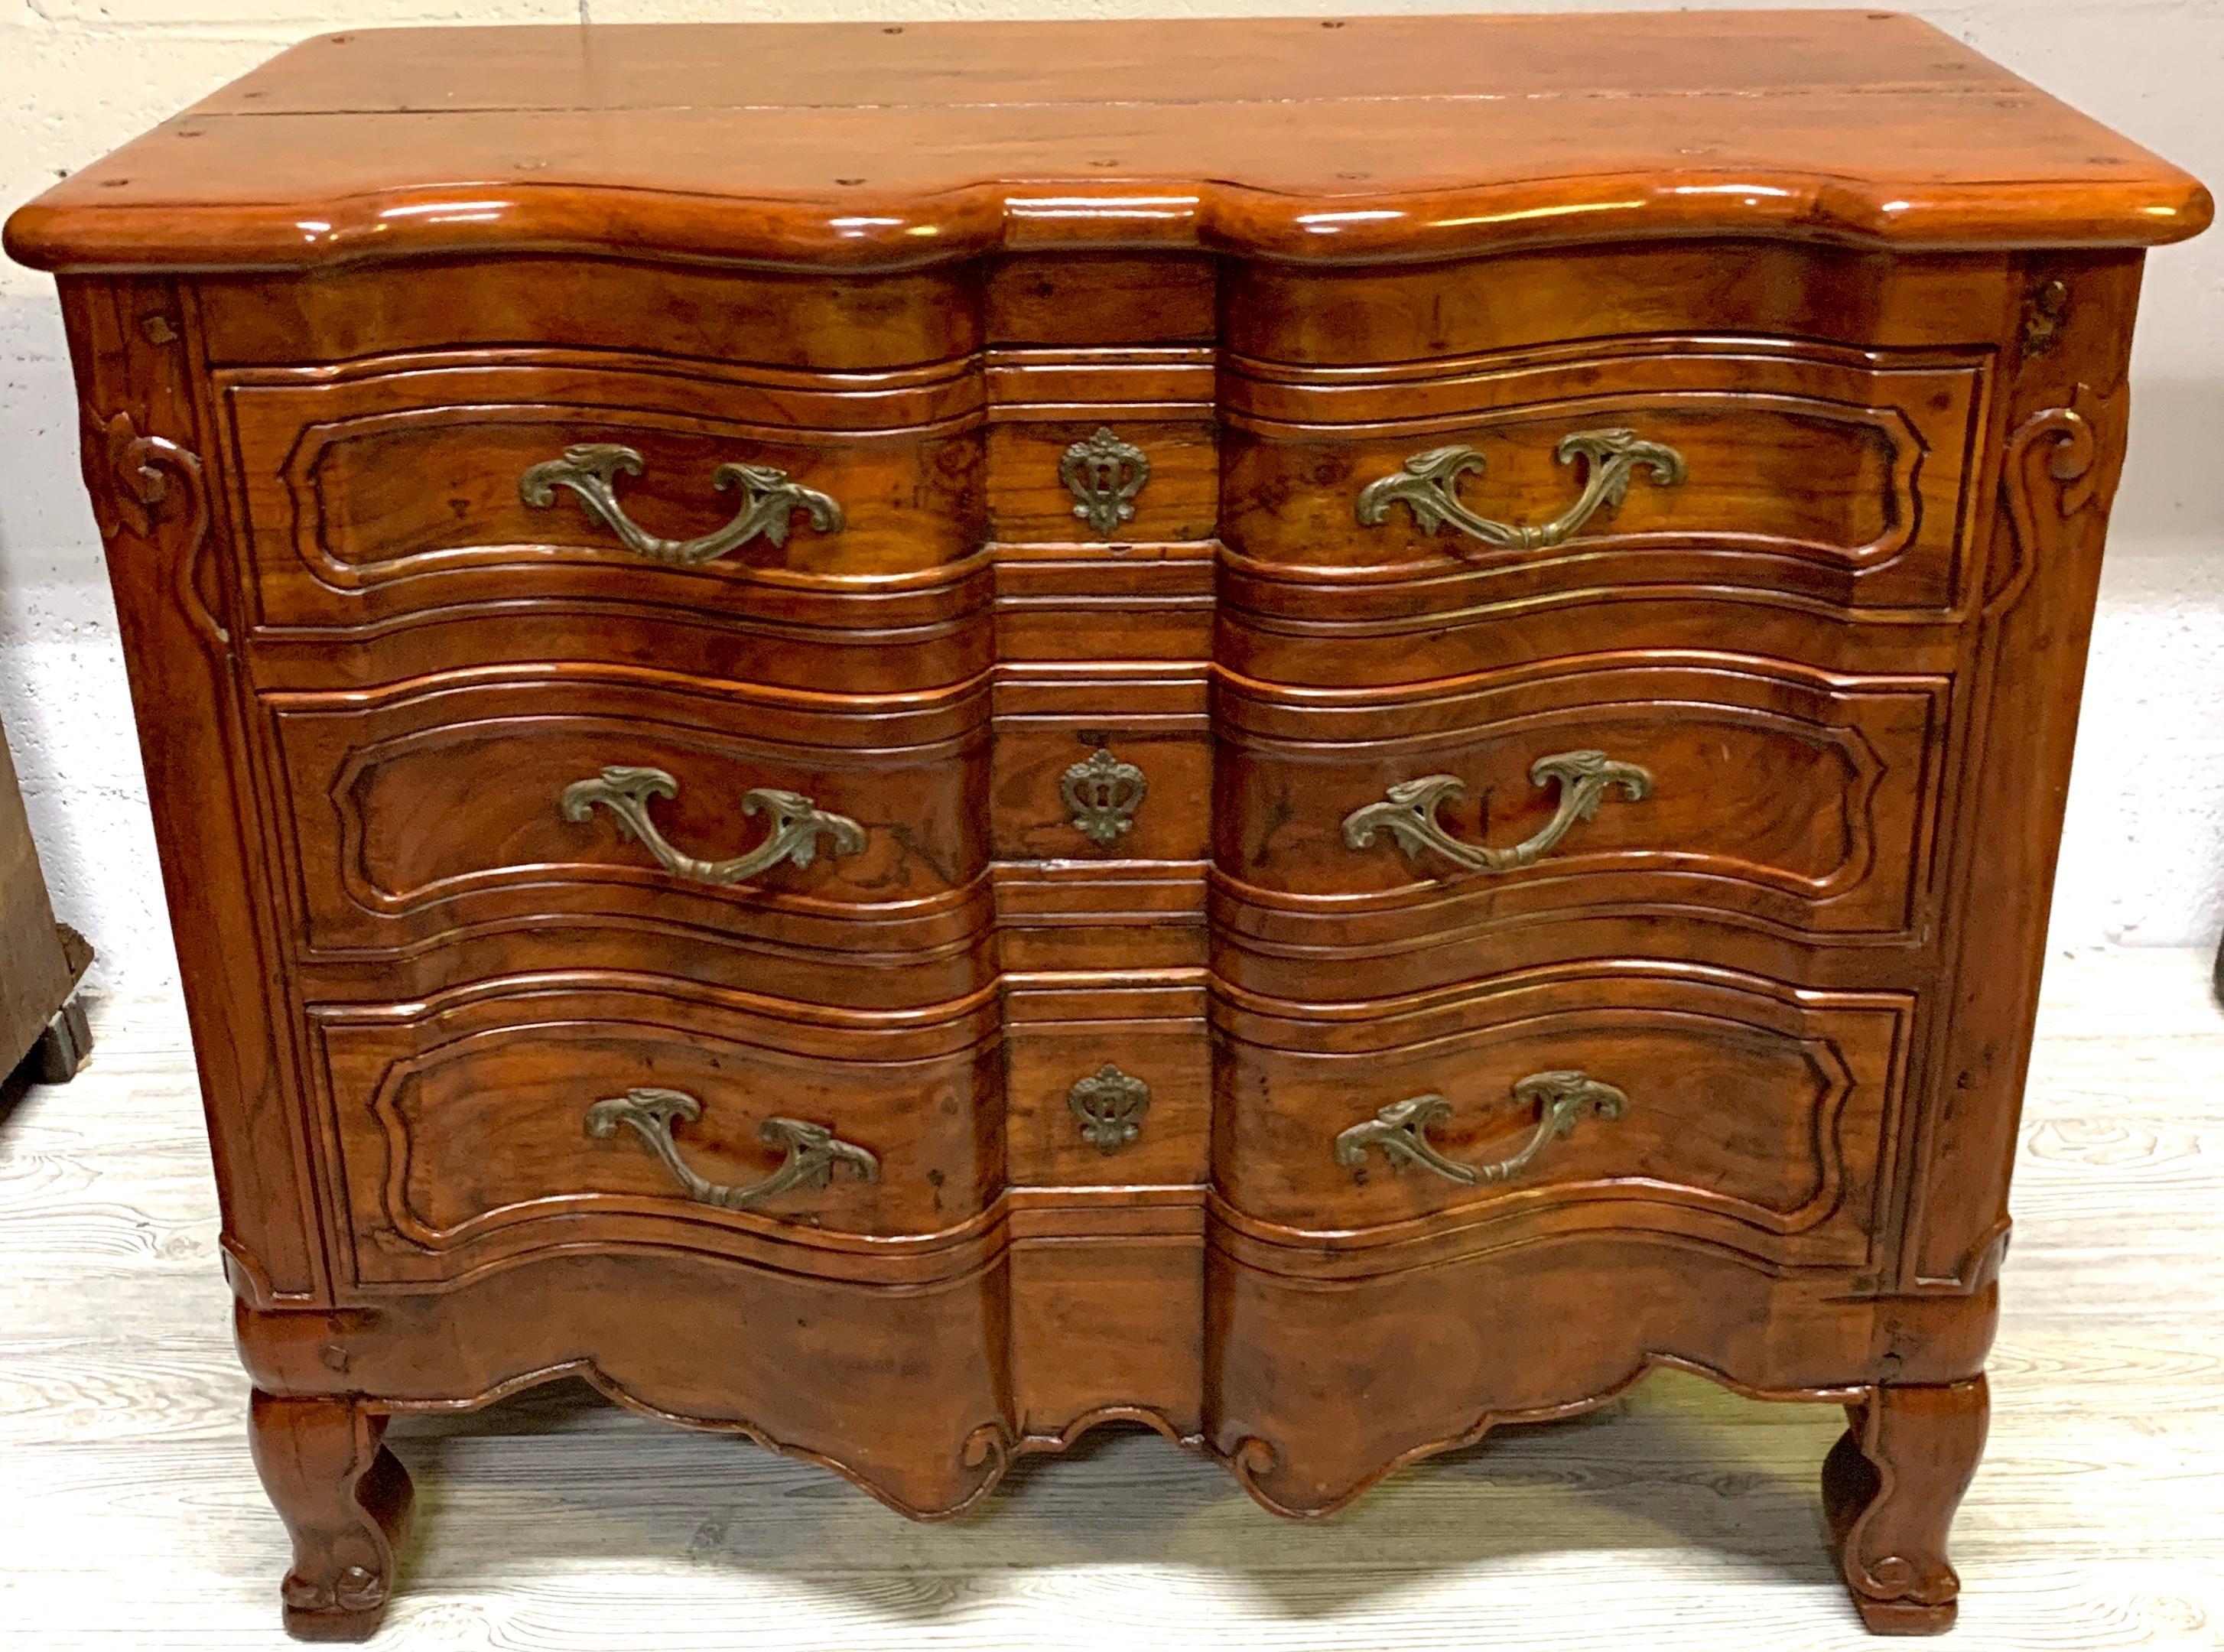 French Provincial style cherry block front commode, with block front case, of heavy dowel construction, fitted with four 33.5